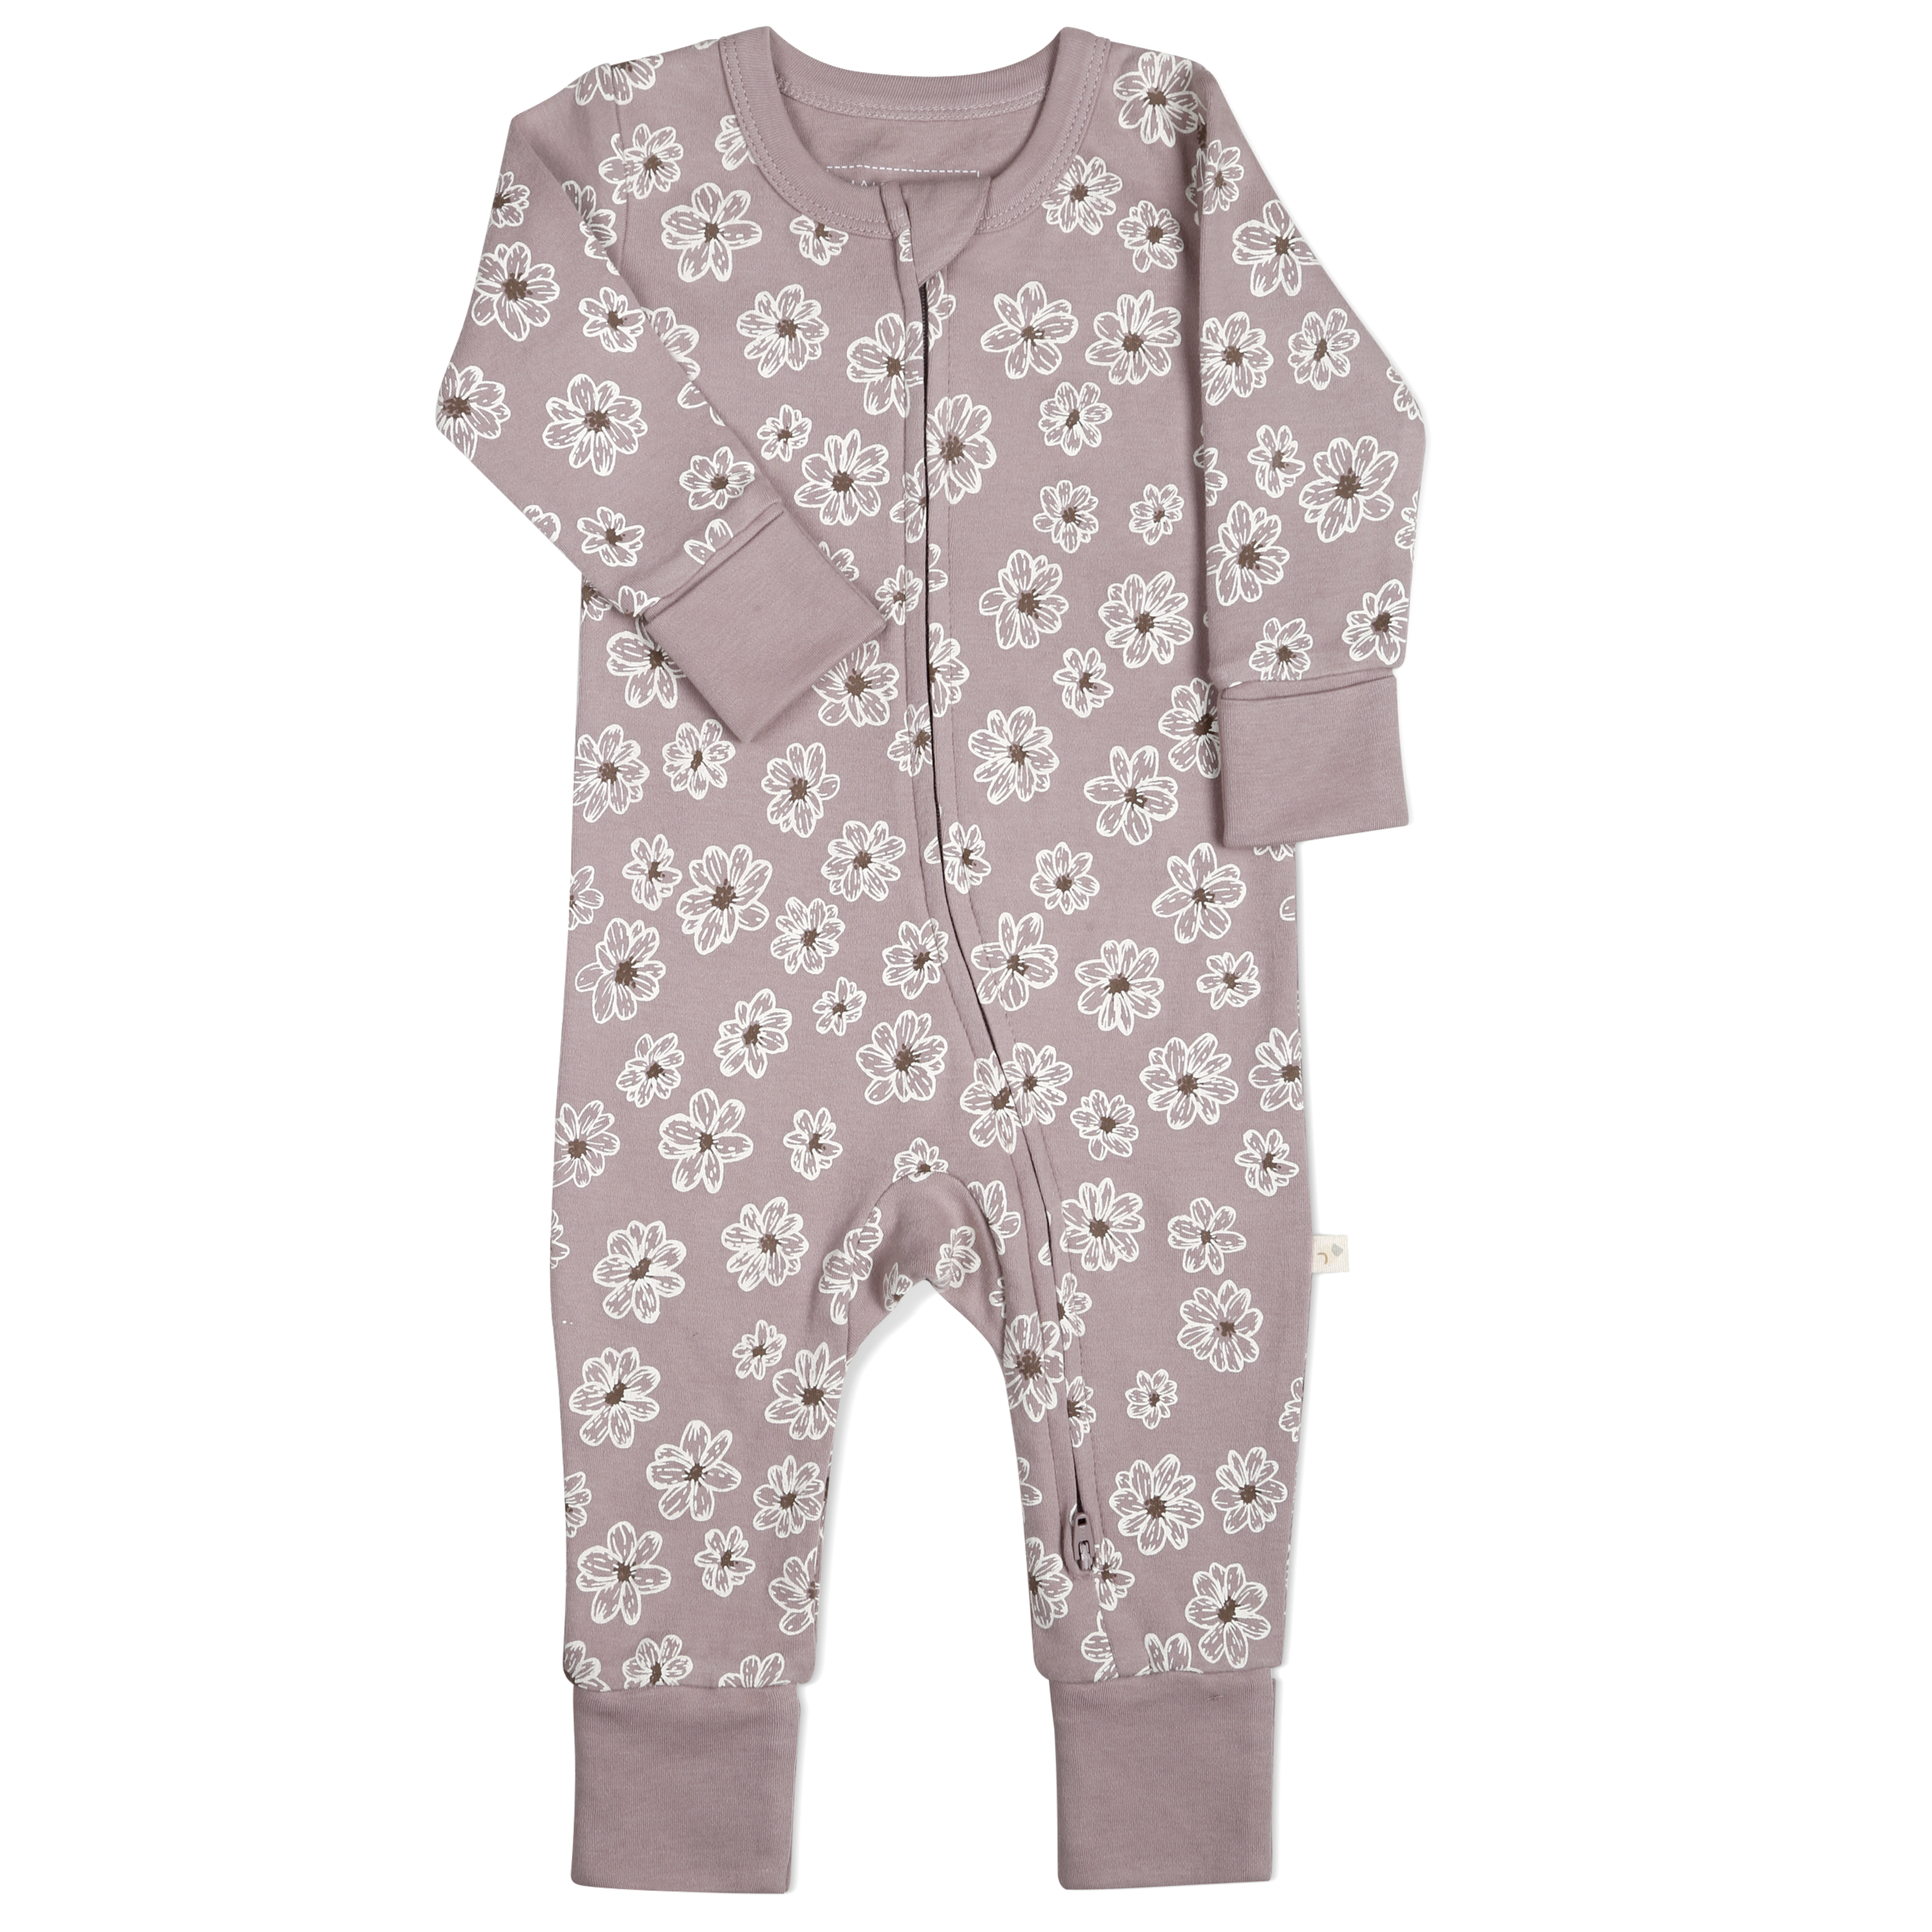 A toddler's long-sleeve footed pajama in light gray with a white floral pattern, featuring a snap closure running from the neckline down to the left ankle.(Product Name: Organic 2-Way Zip Romper - Daisies , Brand Name: Makemake Organics)